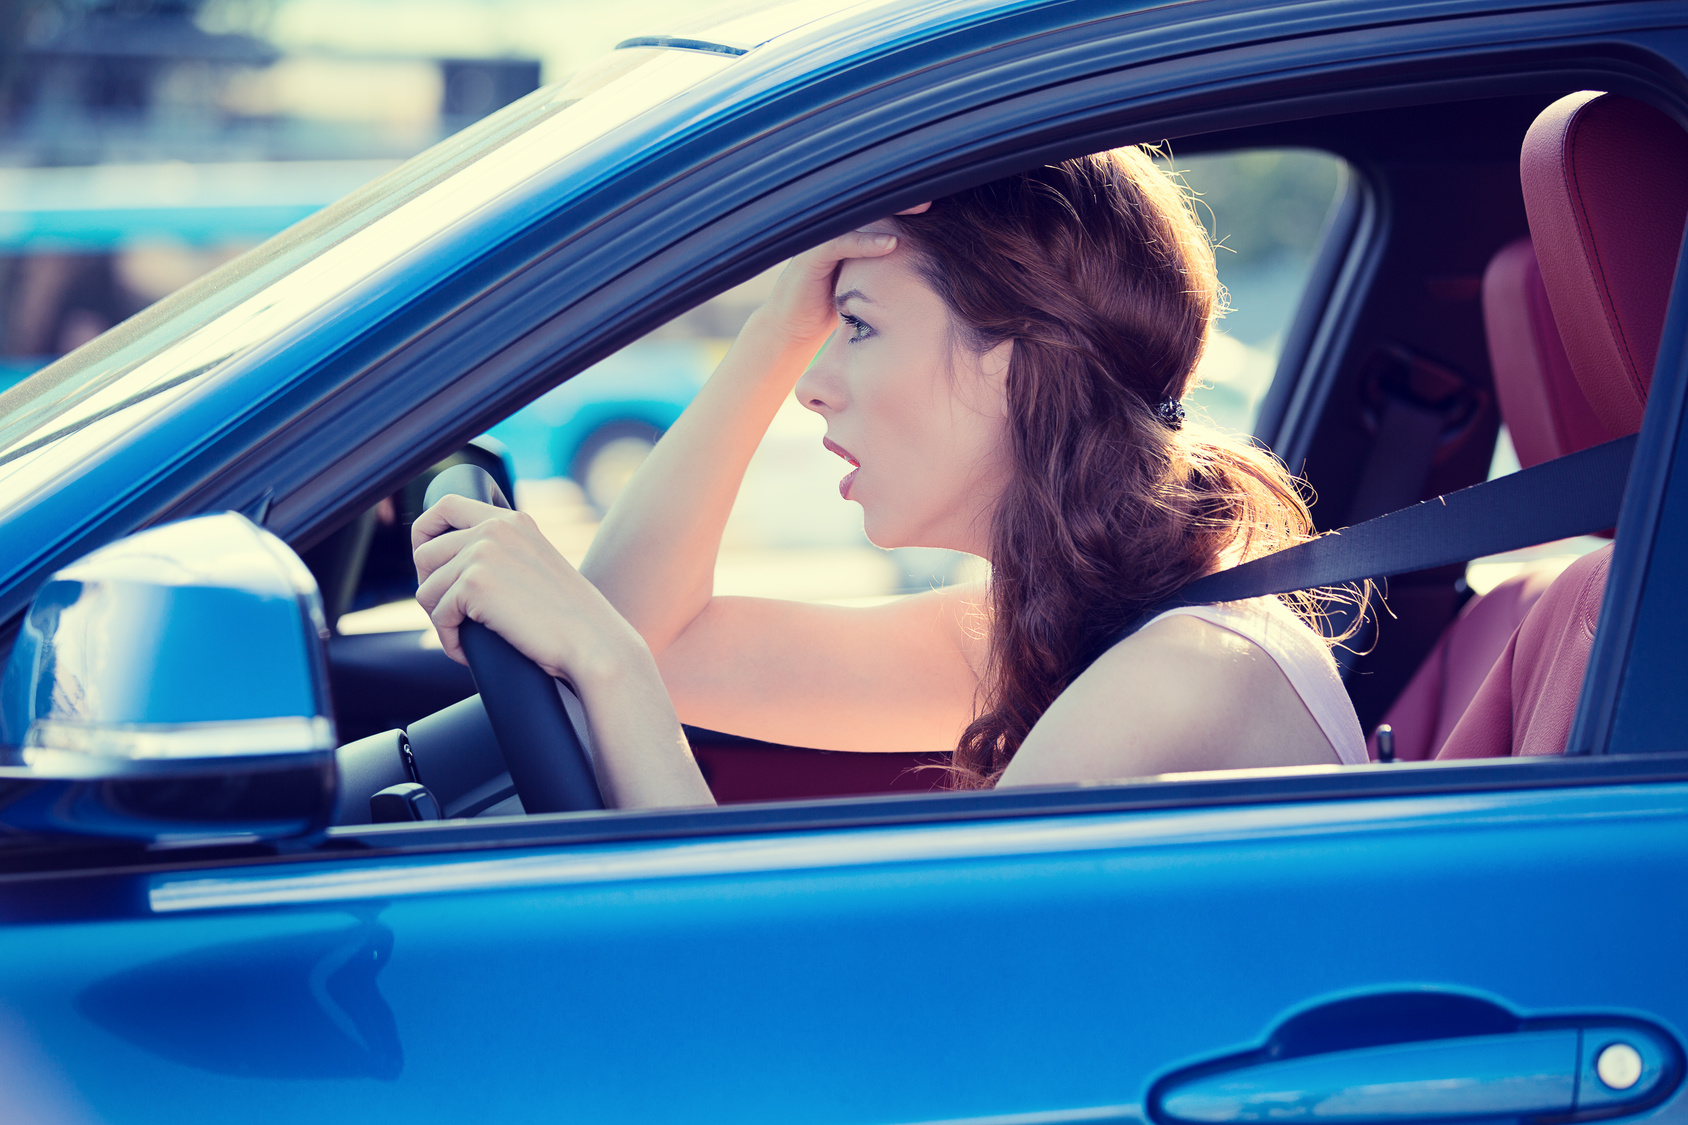 How to Deal with an Uninsured Motorist After an Accident